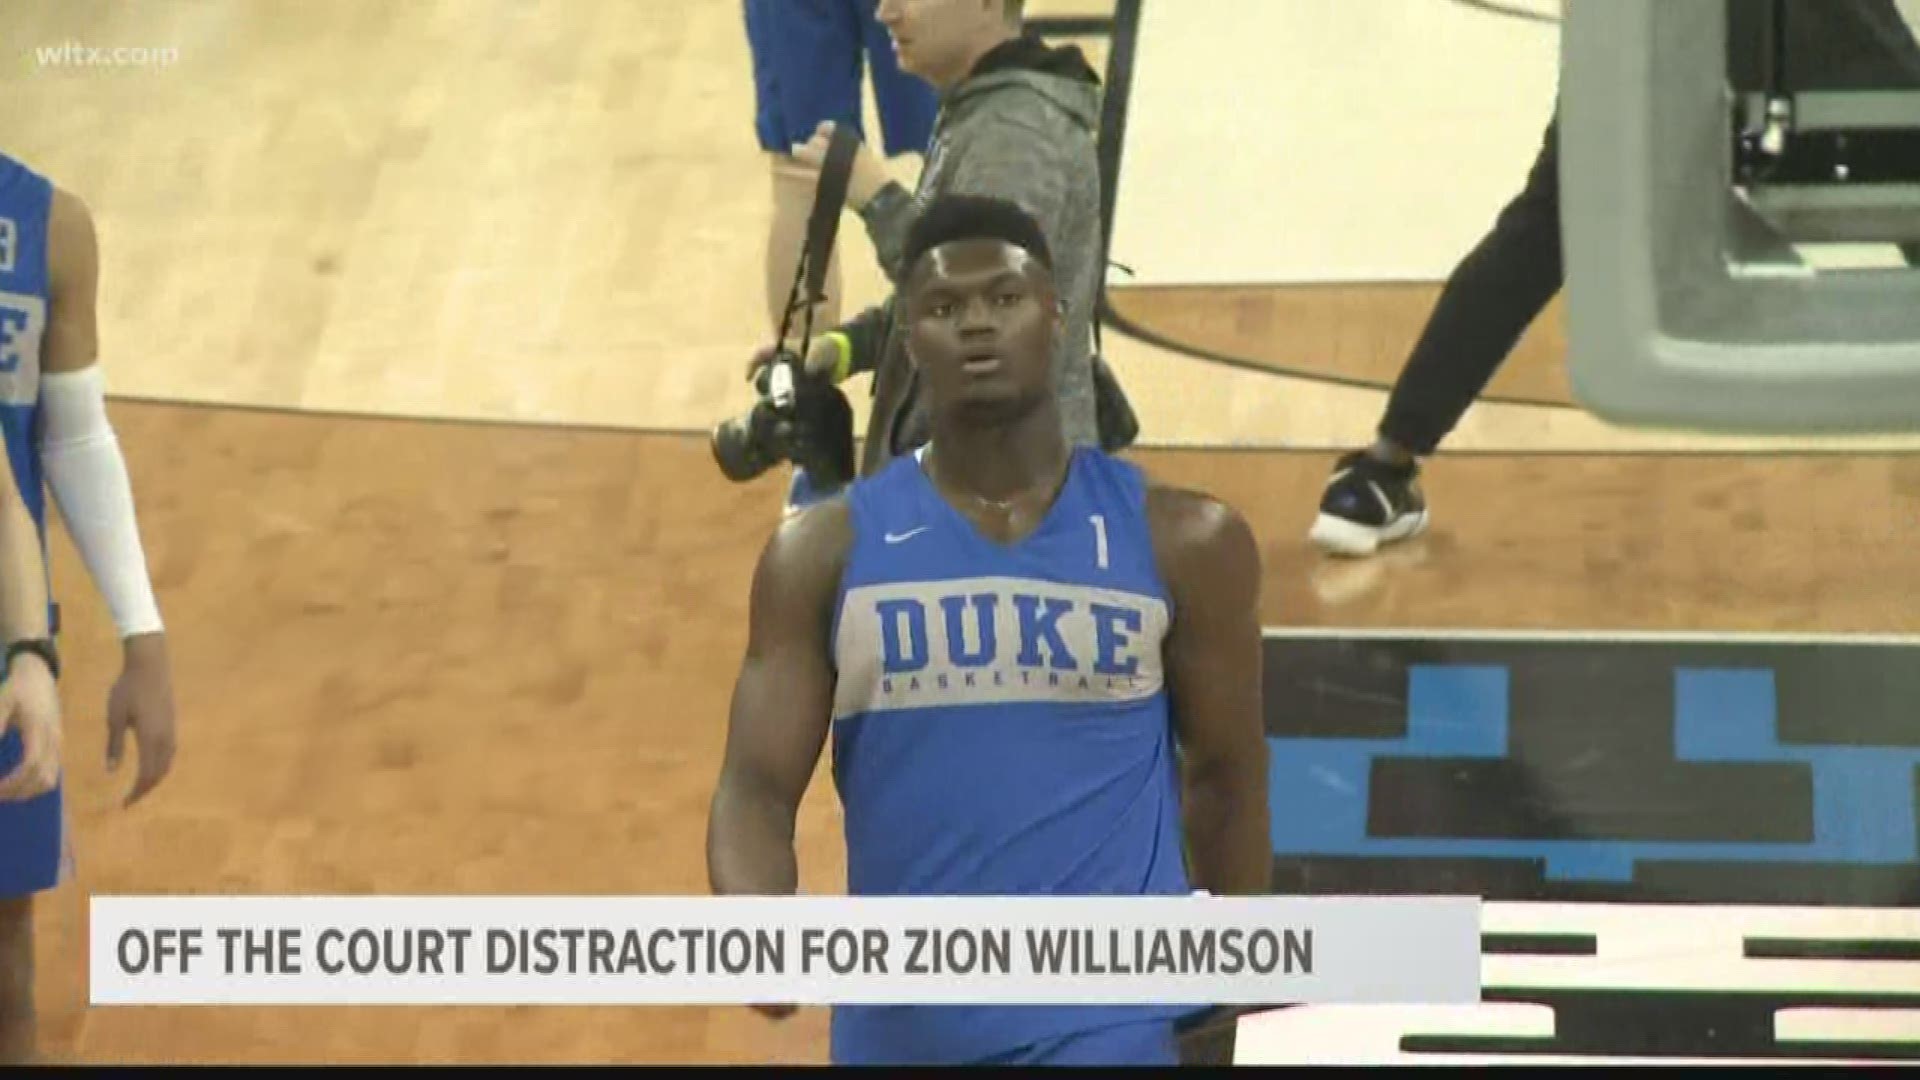 Zion Williamson could face a $100 million lawsuit from a sports marketing company who he feels violated their agreement by not adhering to certain rules and regulations